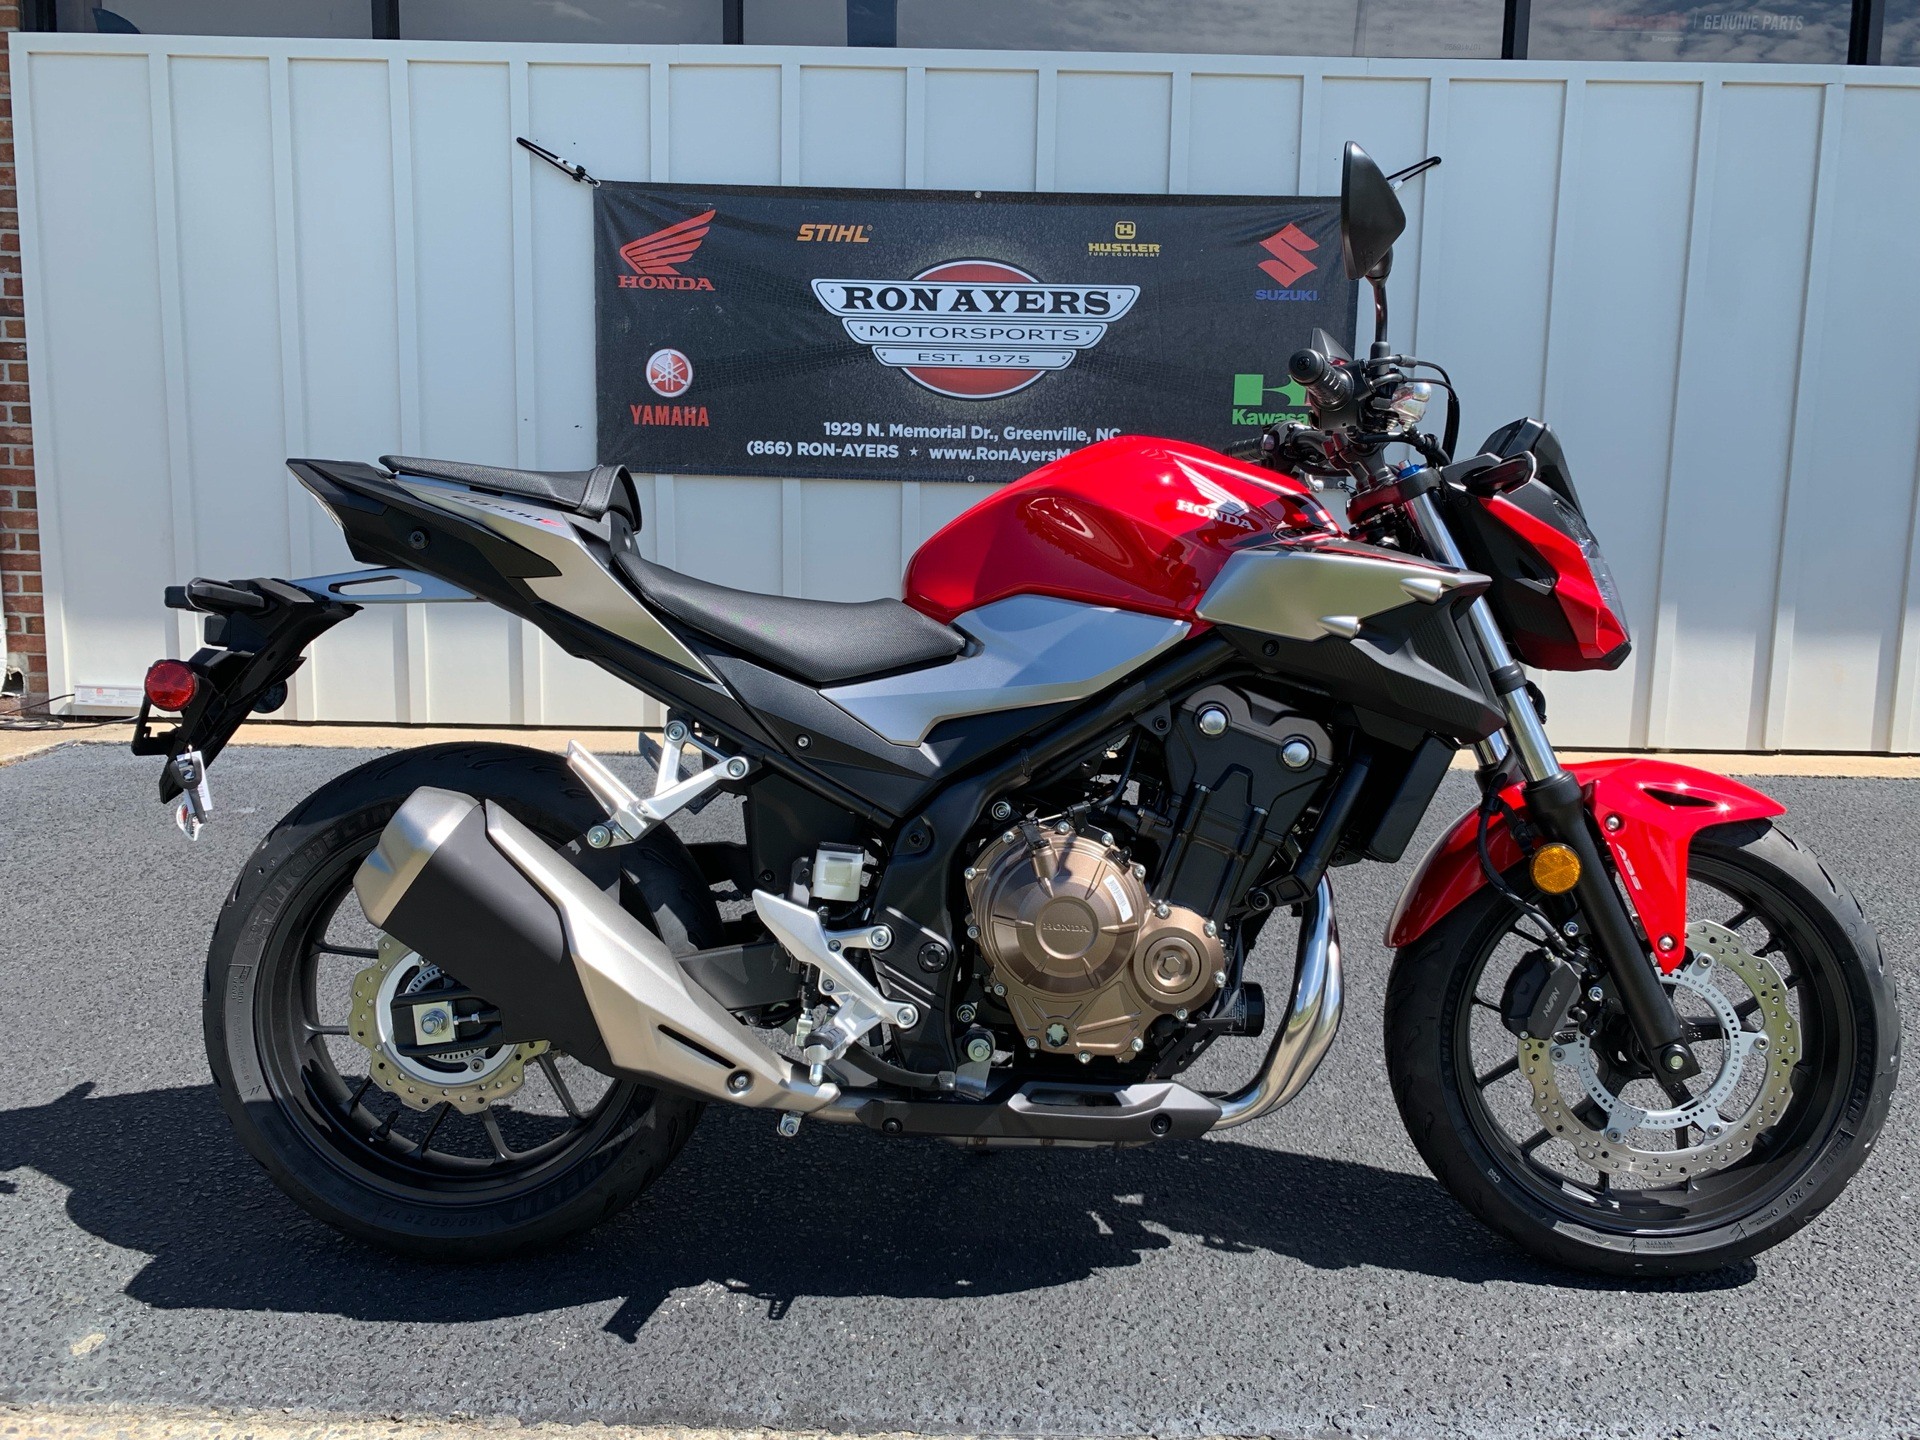 New 2019 Honda CB500F ABS Motorcycles in Greenville, NC | Stock Number: N/A